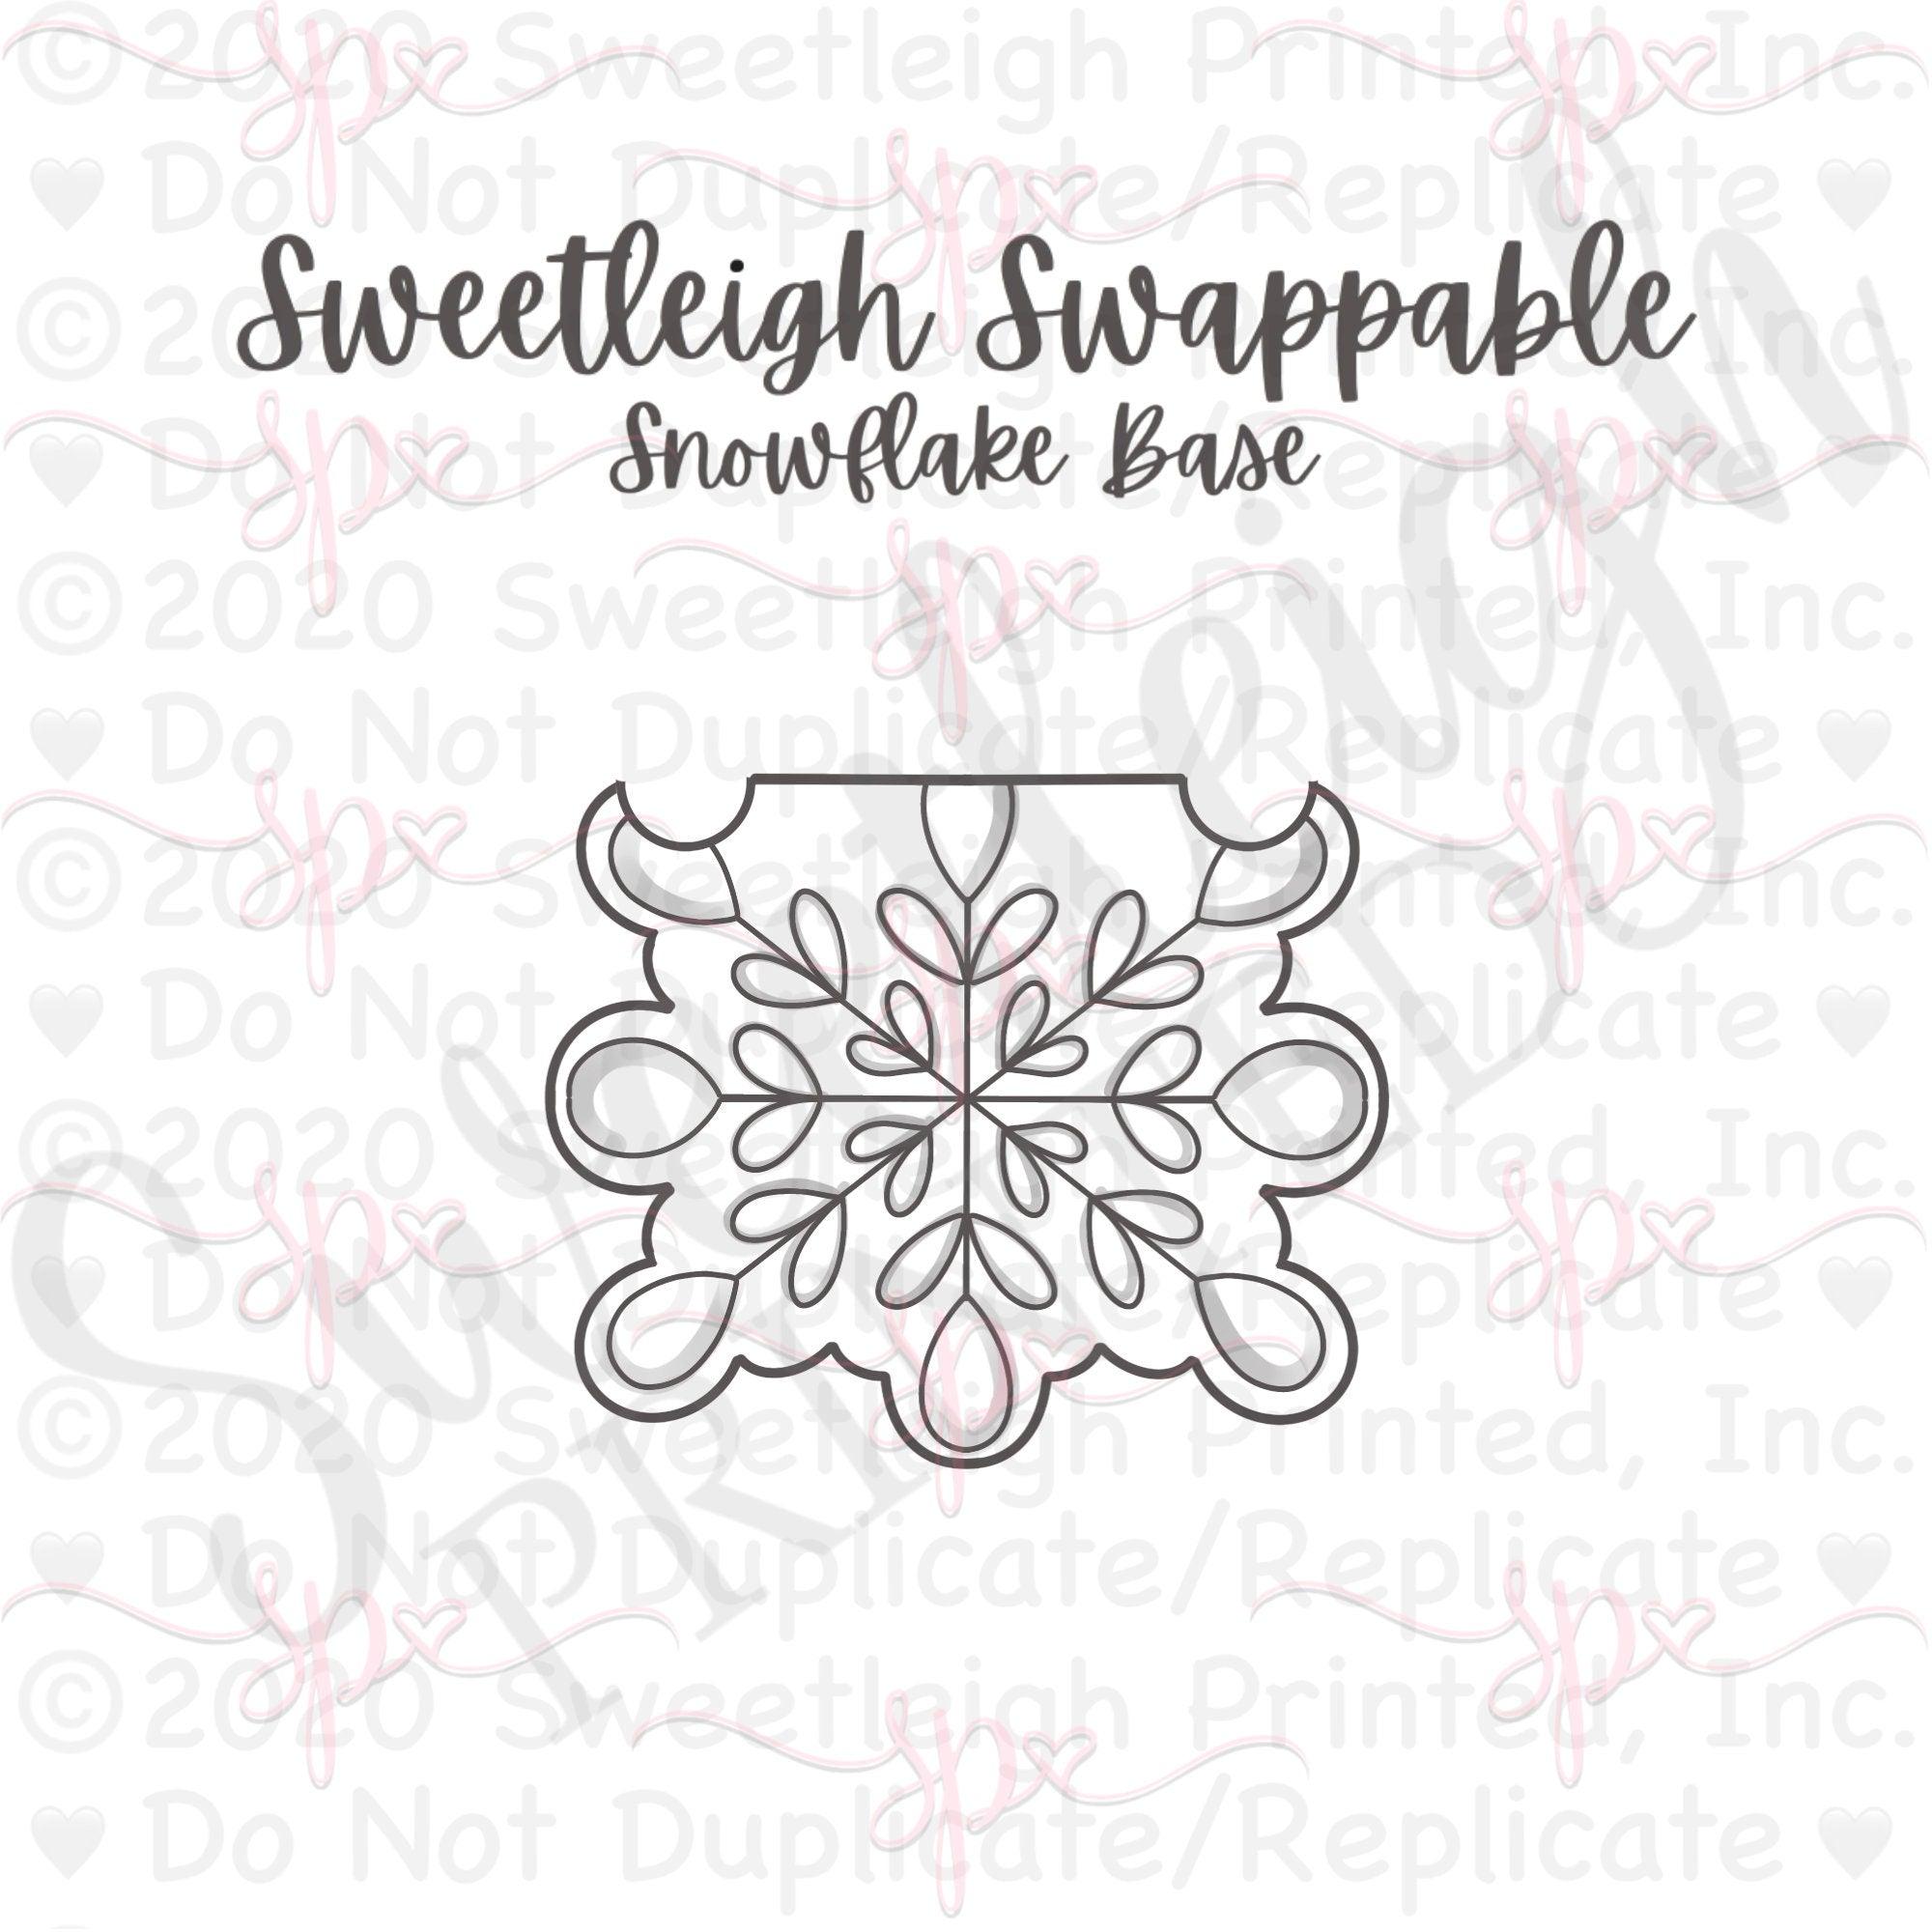 Sweetleigh Swappable Snowflake Base Cookie Cutter - Sweetleigh 